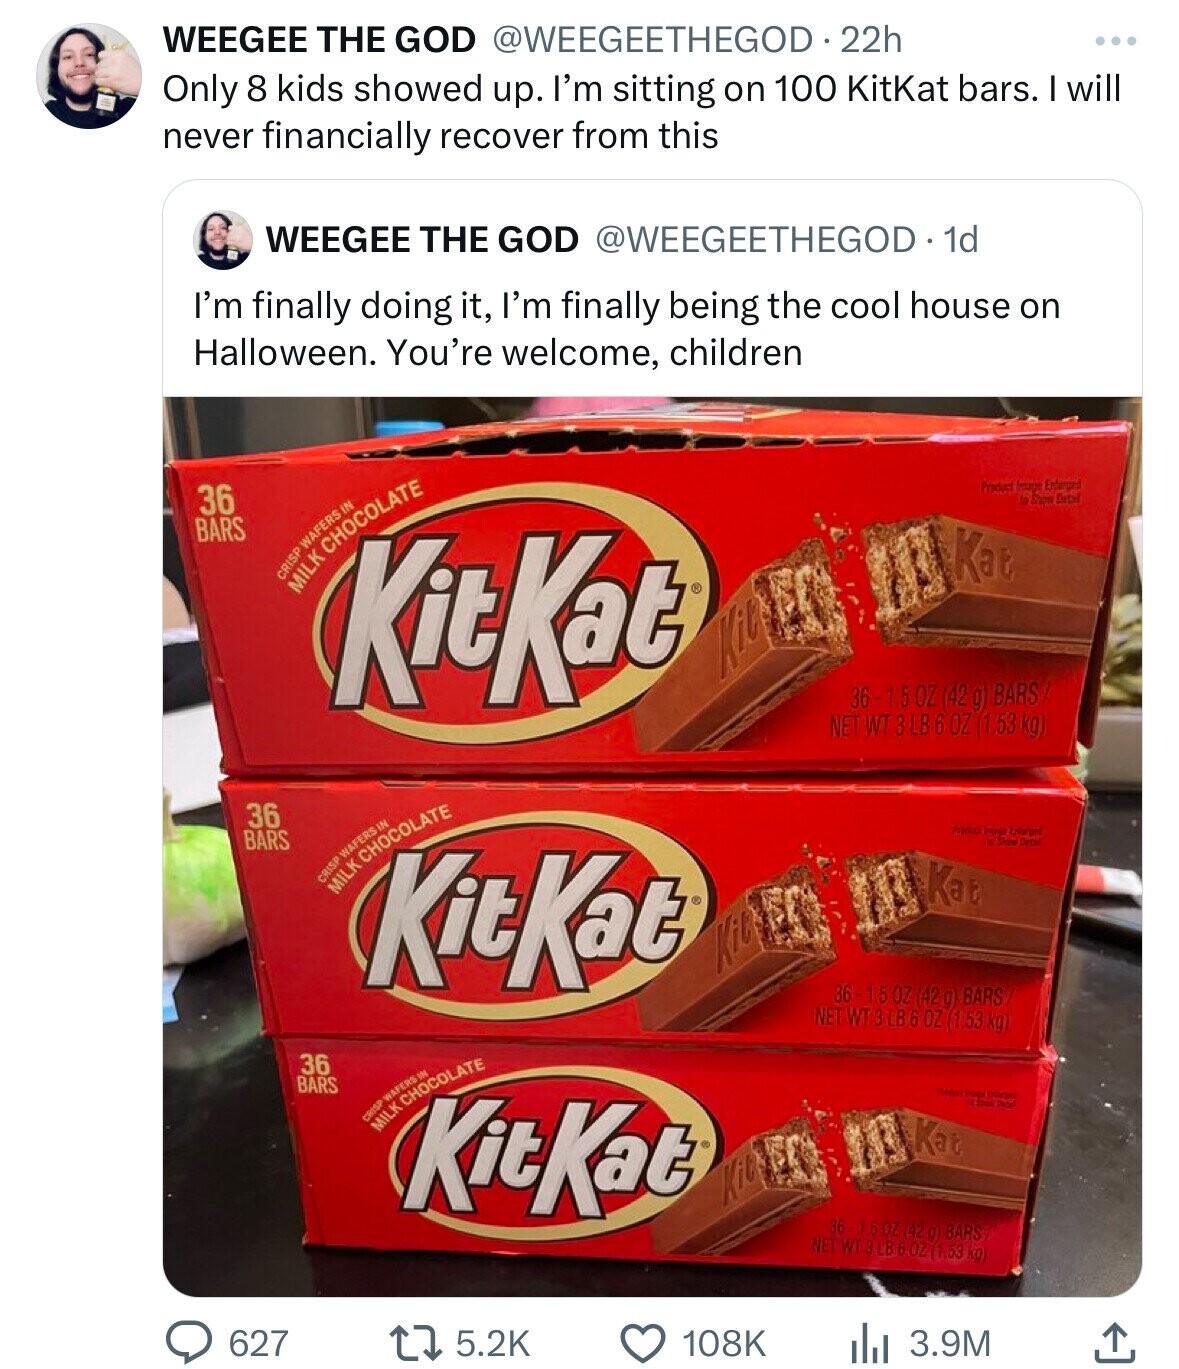 snack - Weegee The God 22h Only 8 kids showed up. I'm sitting on 100 KitKat bars. I will never financially recover from this Weegee The God . 1d I'm finally doing it, I'm finally being the cool house on Halloween. You're welcome, children 36 Bars 36 Bars 